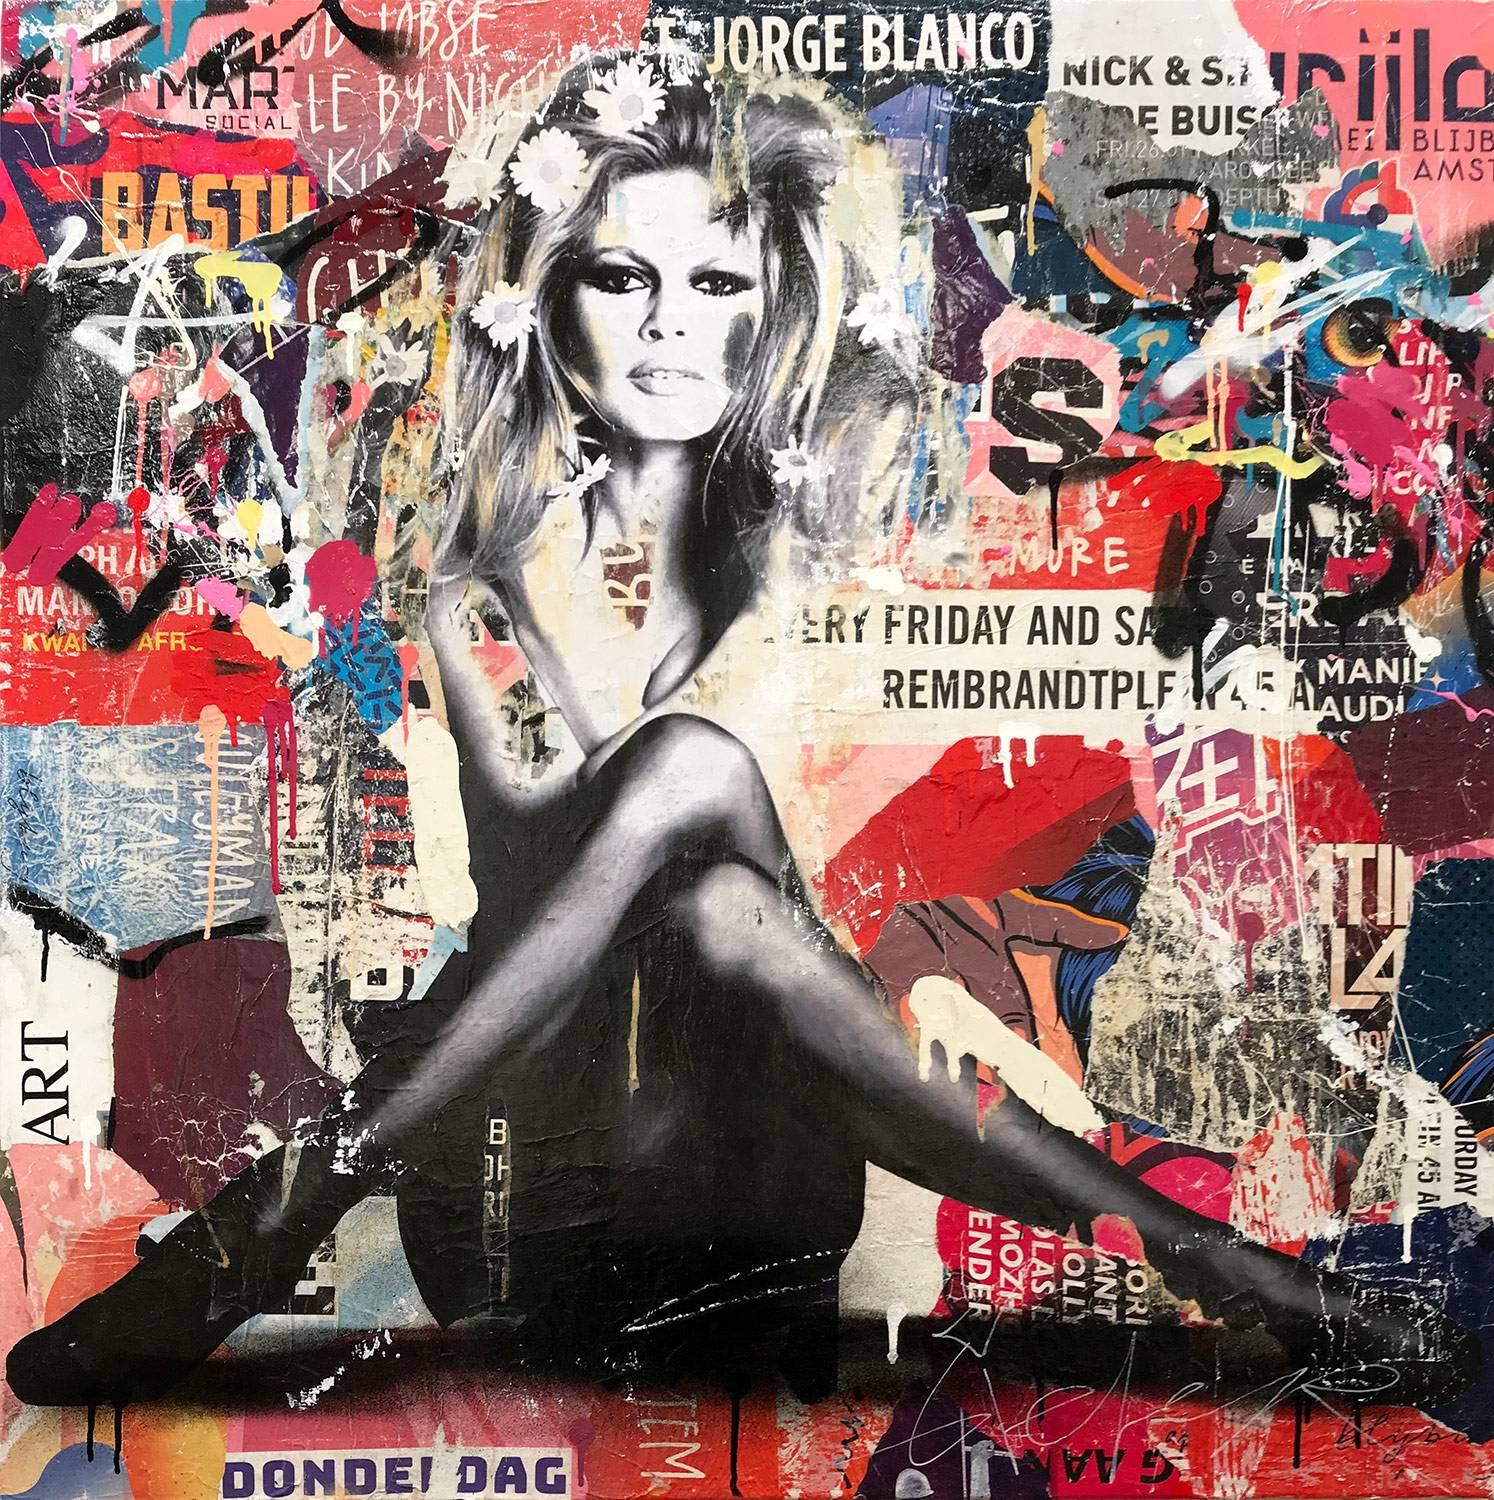 Gieler Abstract Painting - "Brigitte" Street Posters Décollage of Brigitte Bardot Portrait on Canvas